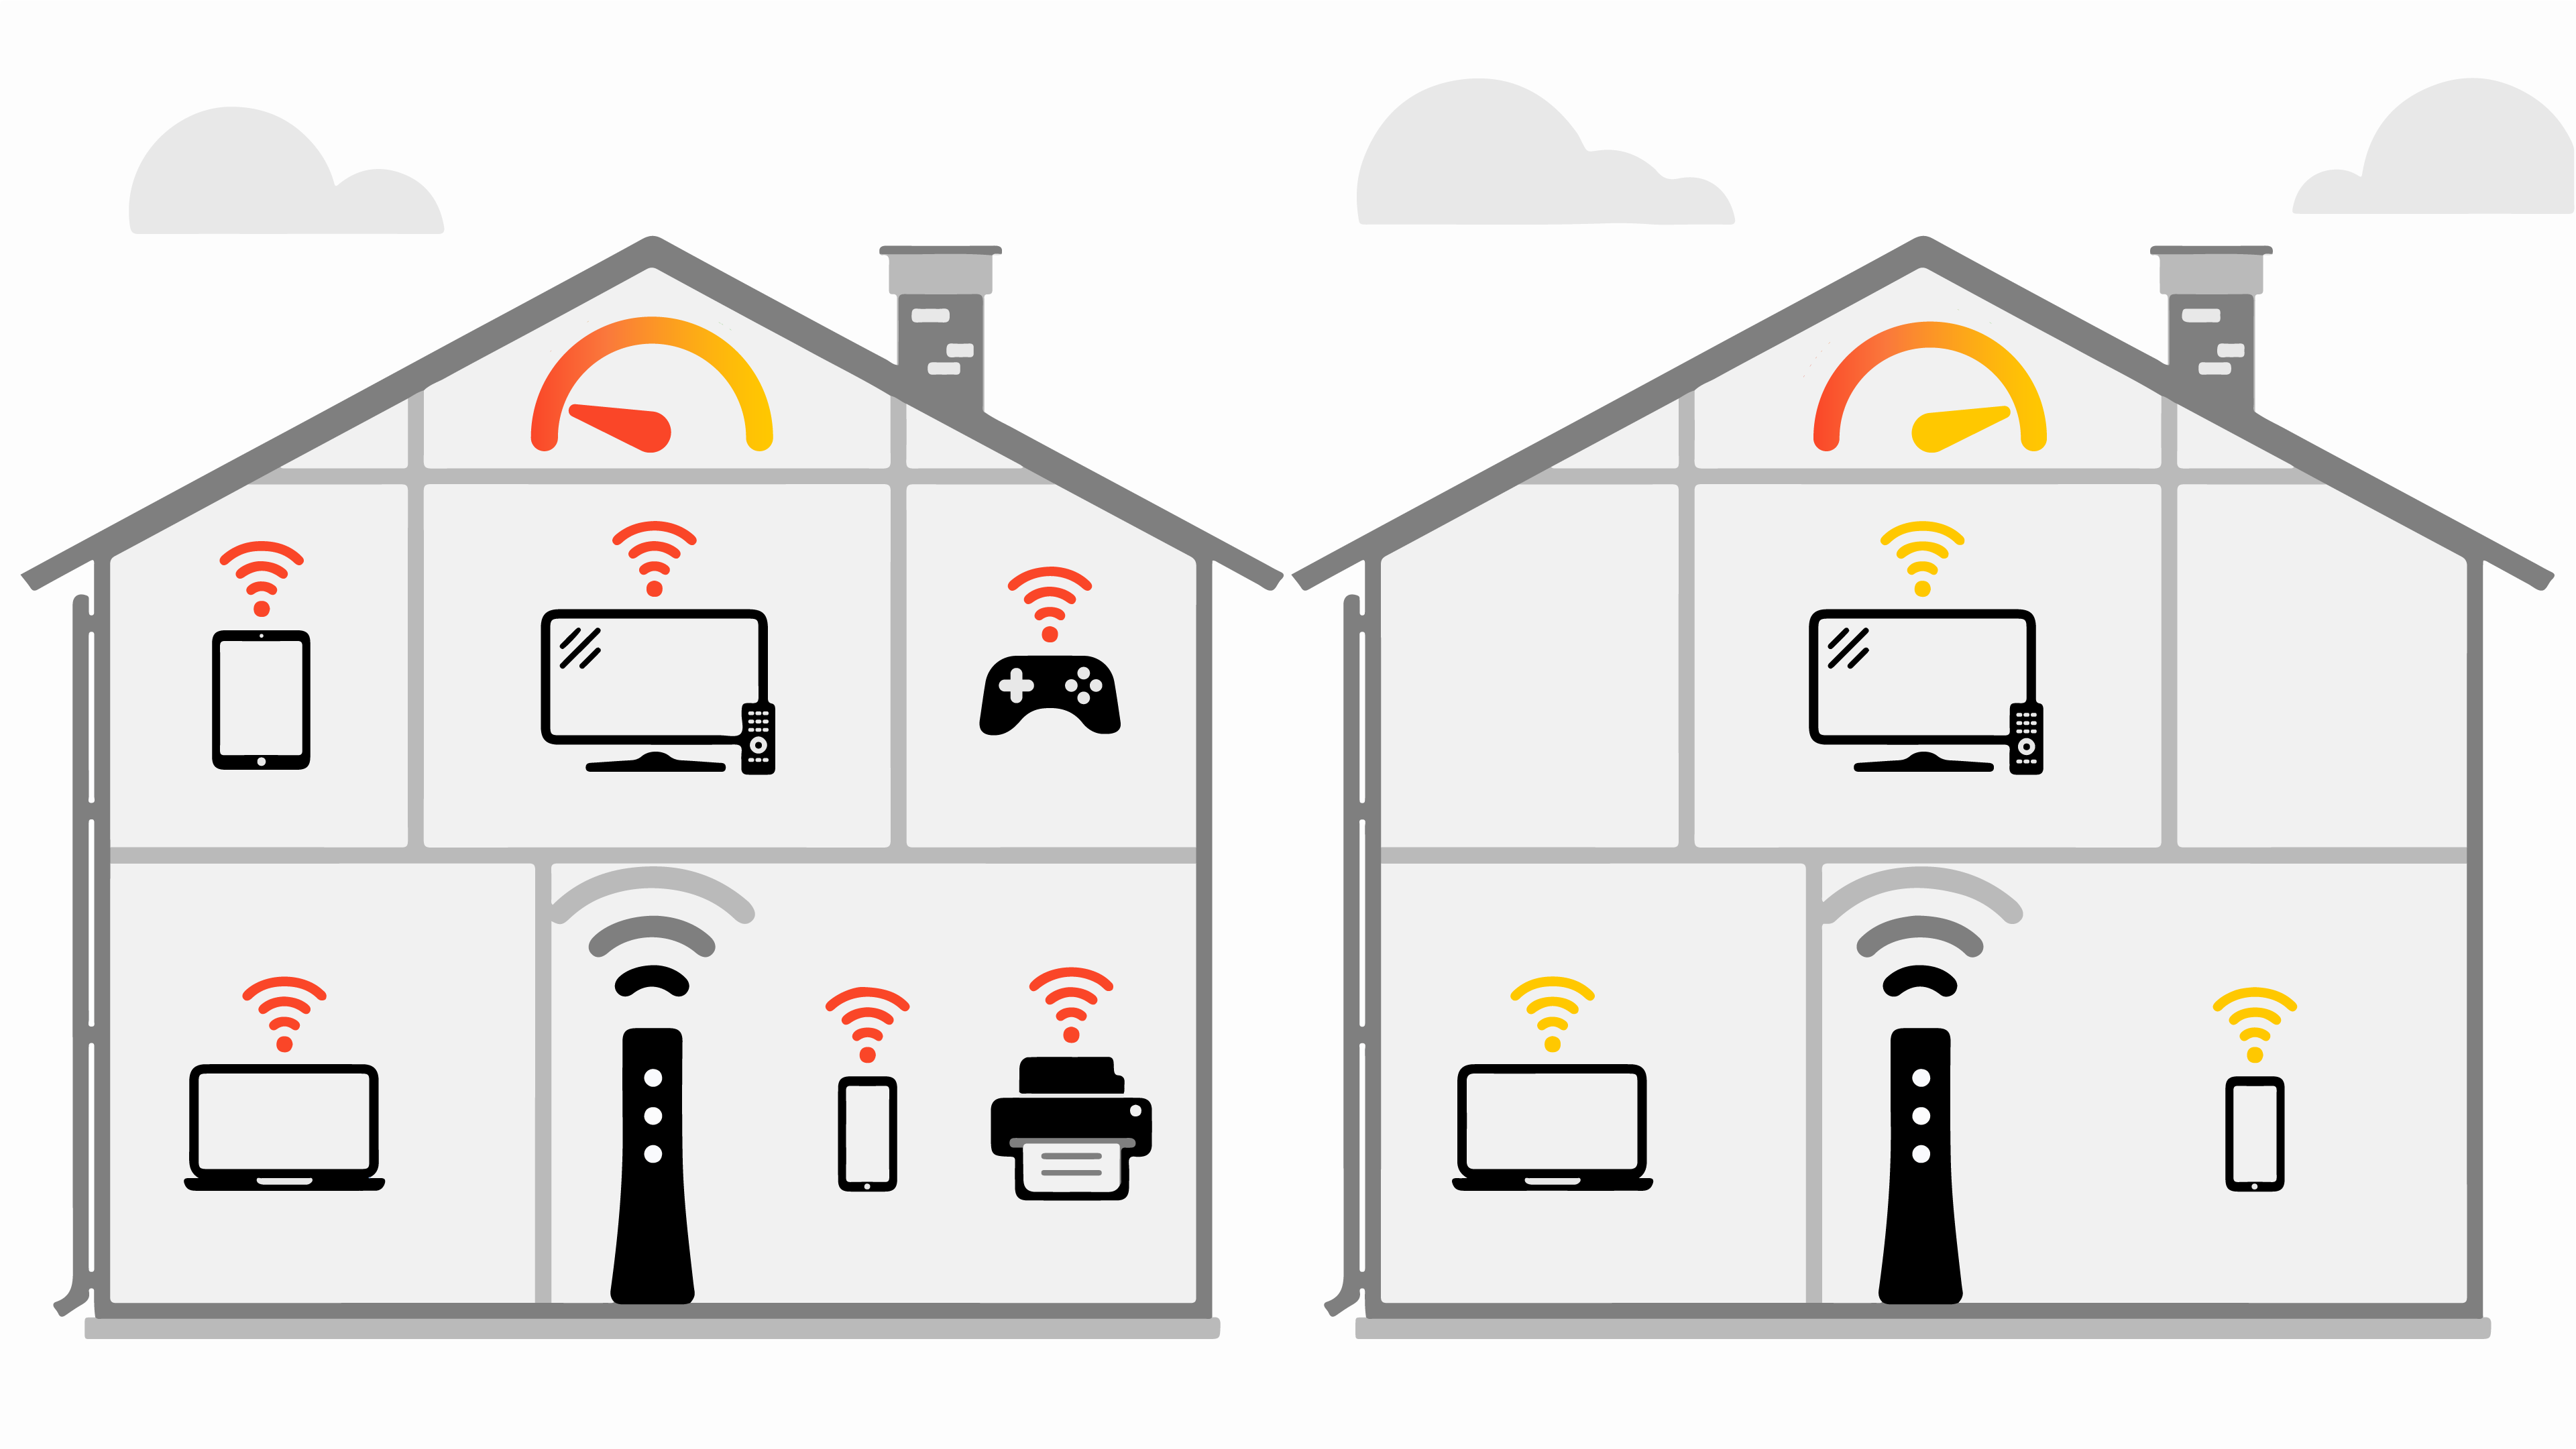 Wifi: signal strength and connection speed decrease when more devices are connected